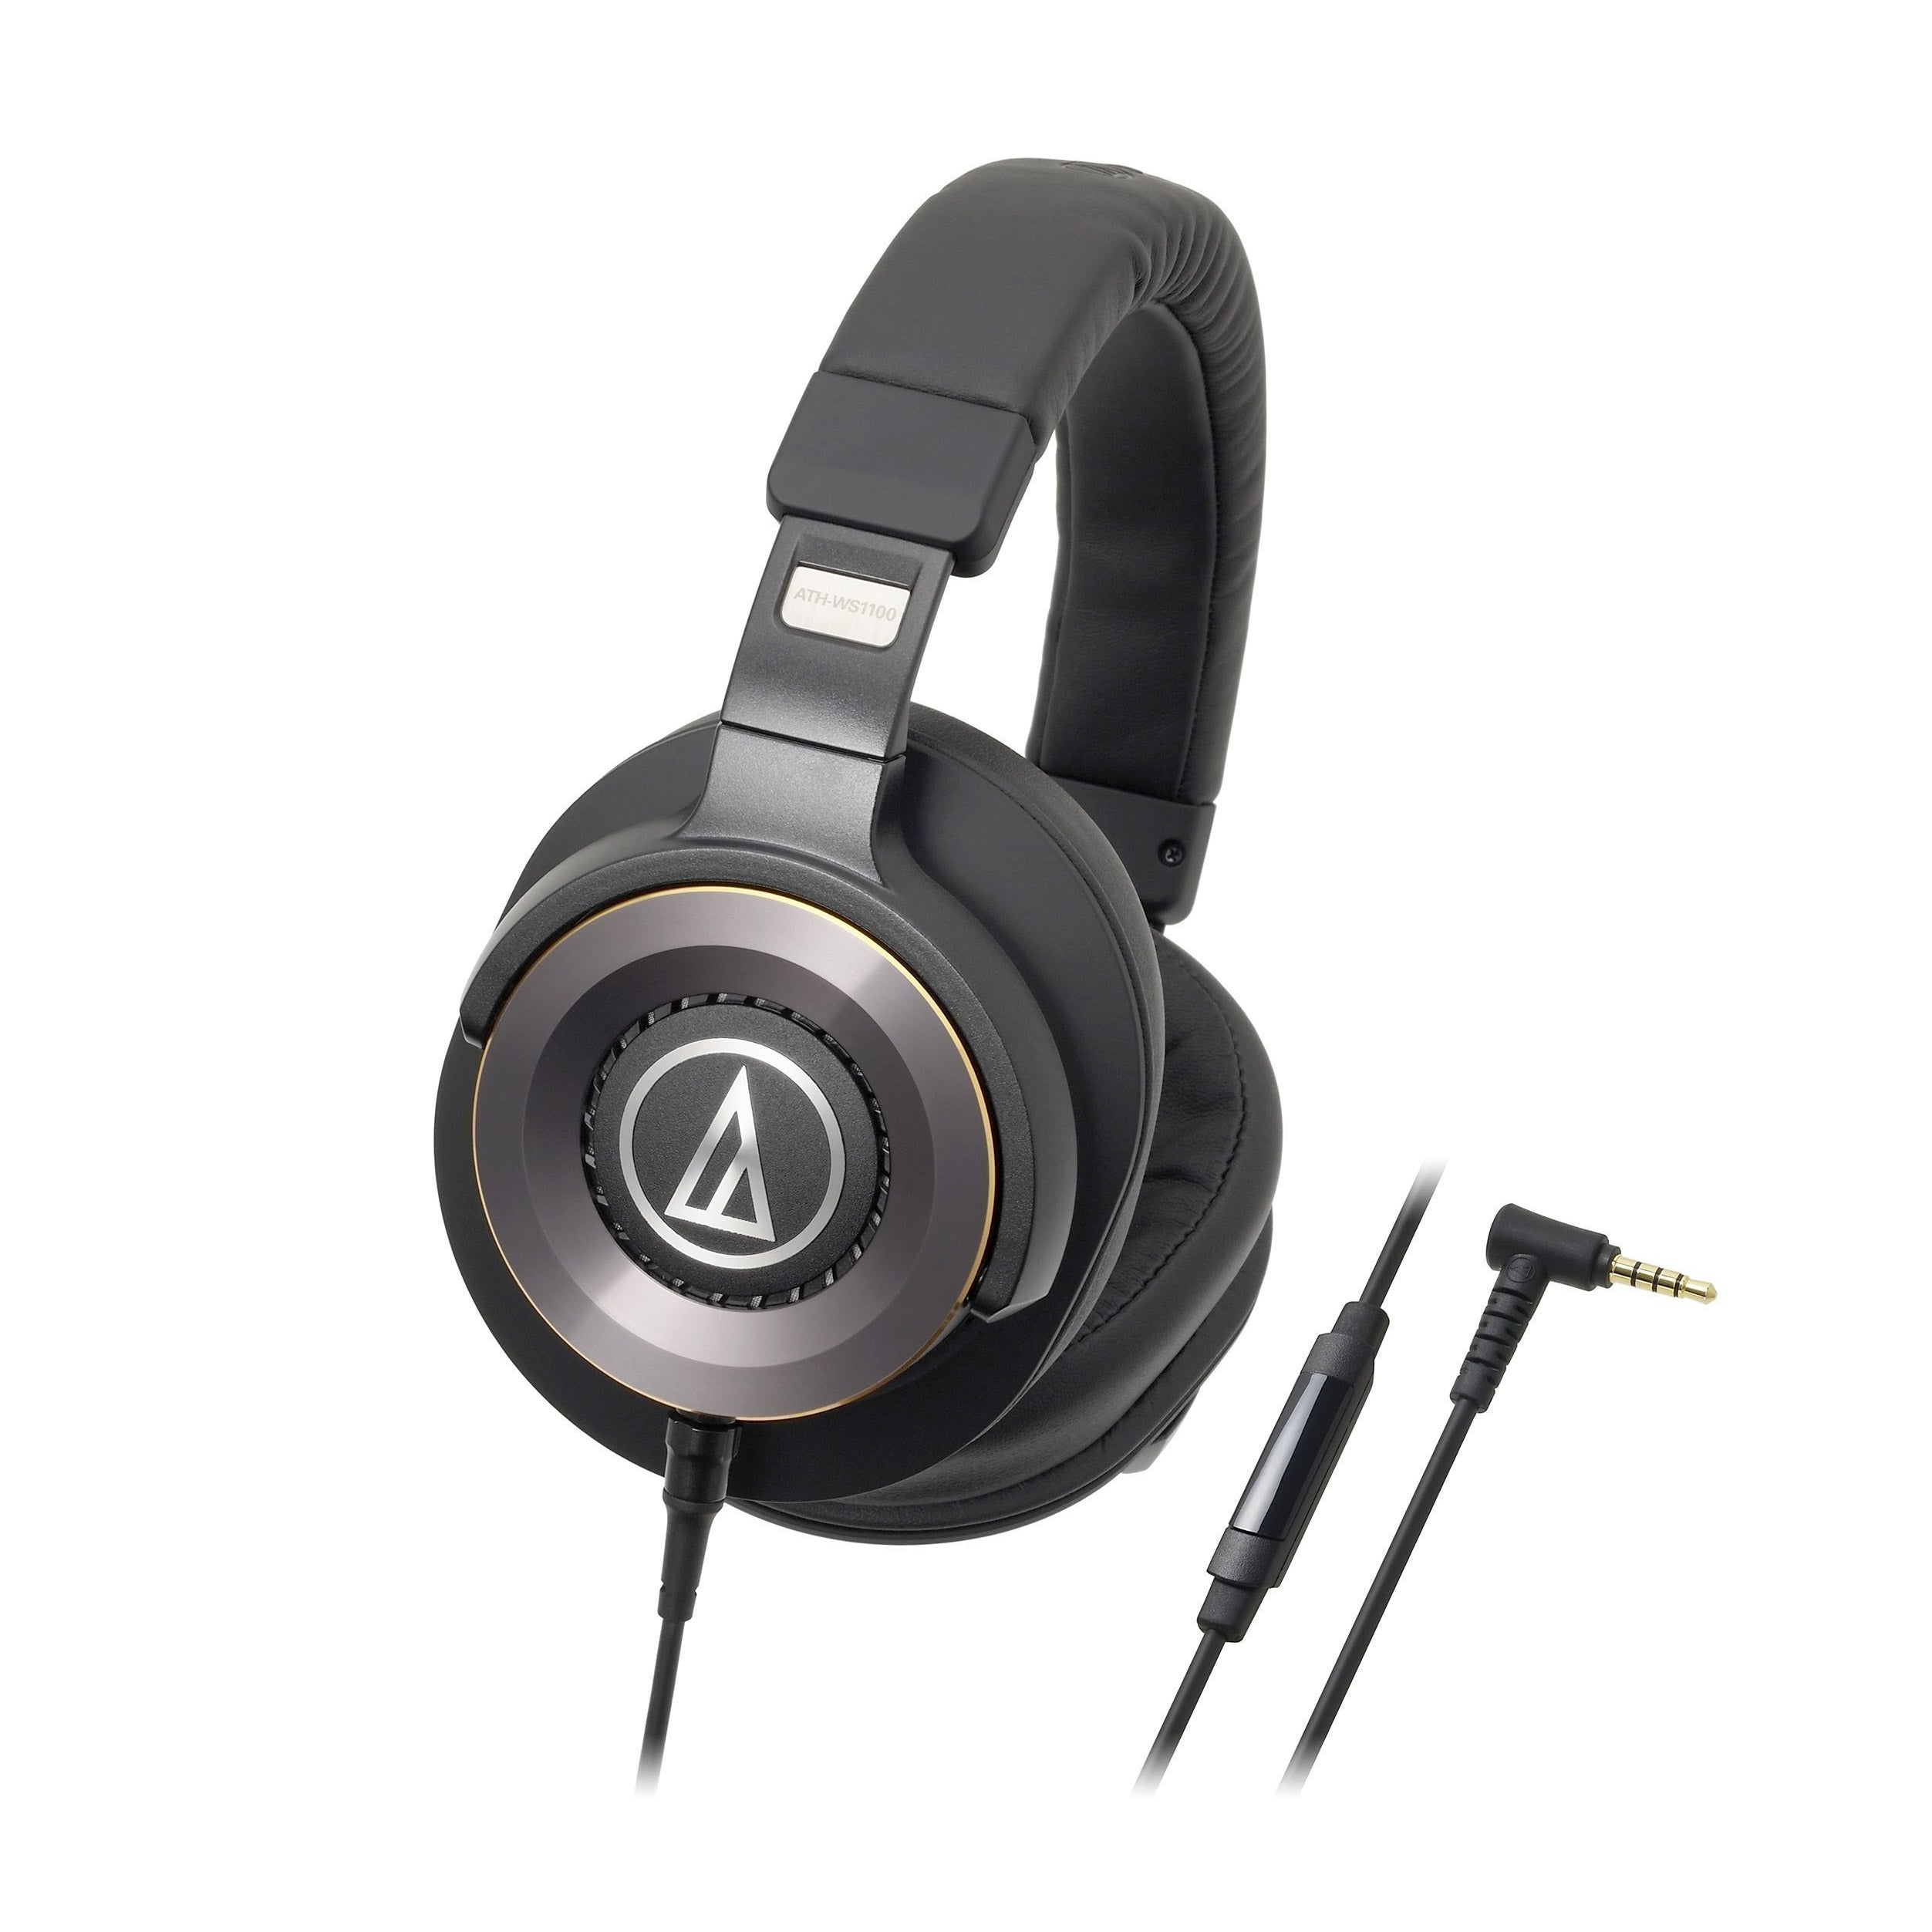 Audio Technica ATH-WS1100iS Solid Bass Over-Ear Headphones with In-line Mic & Control